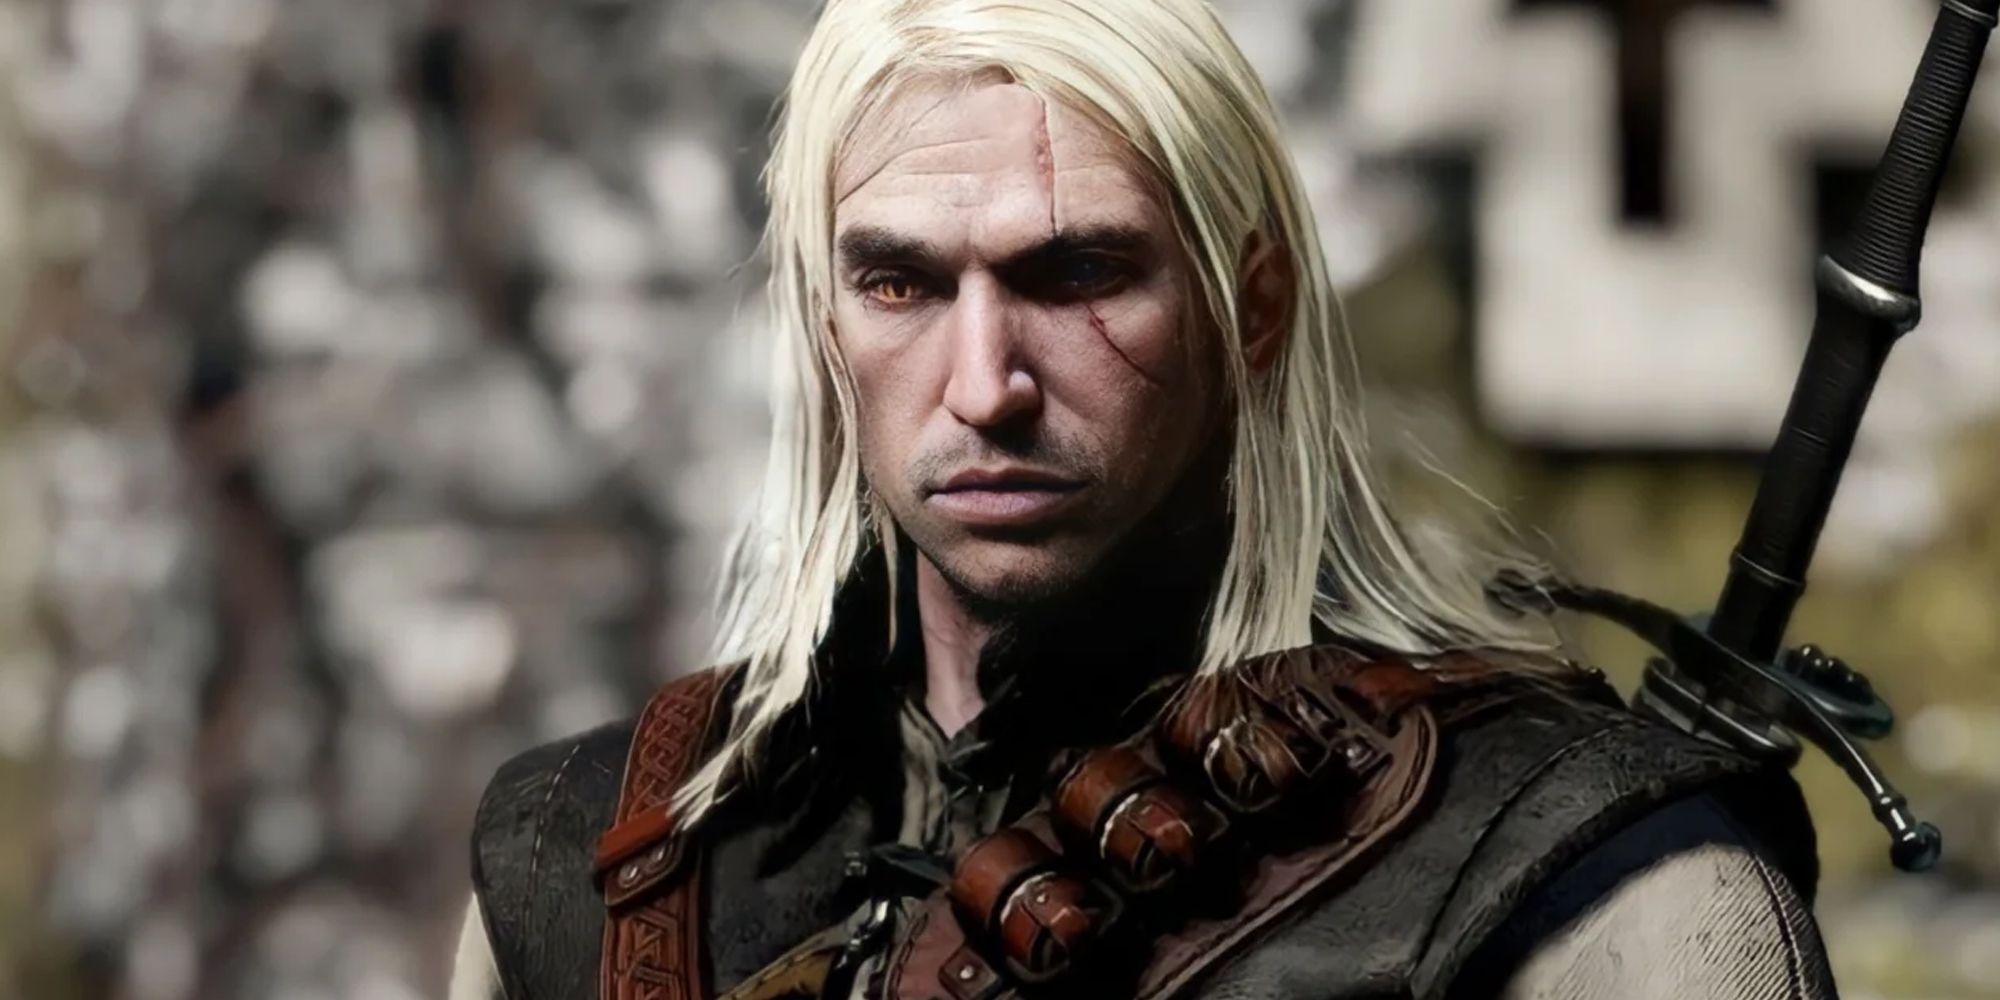 The Witcher 1 is not the obvious remake candidate you might think